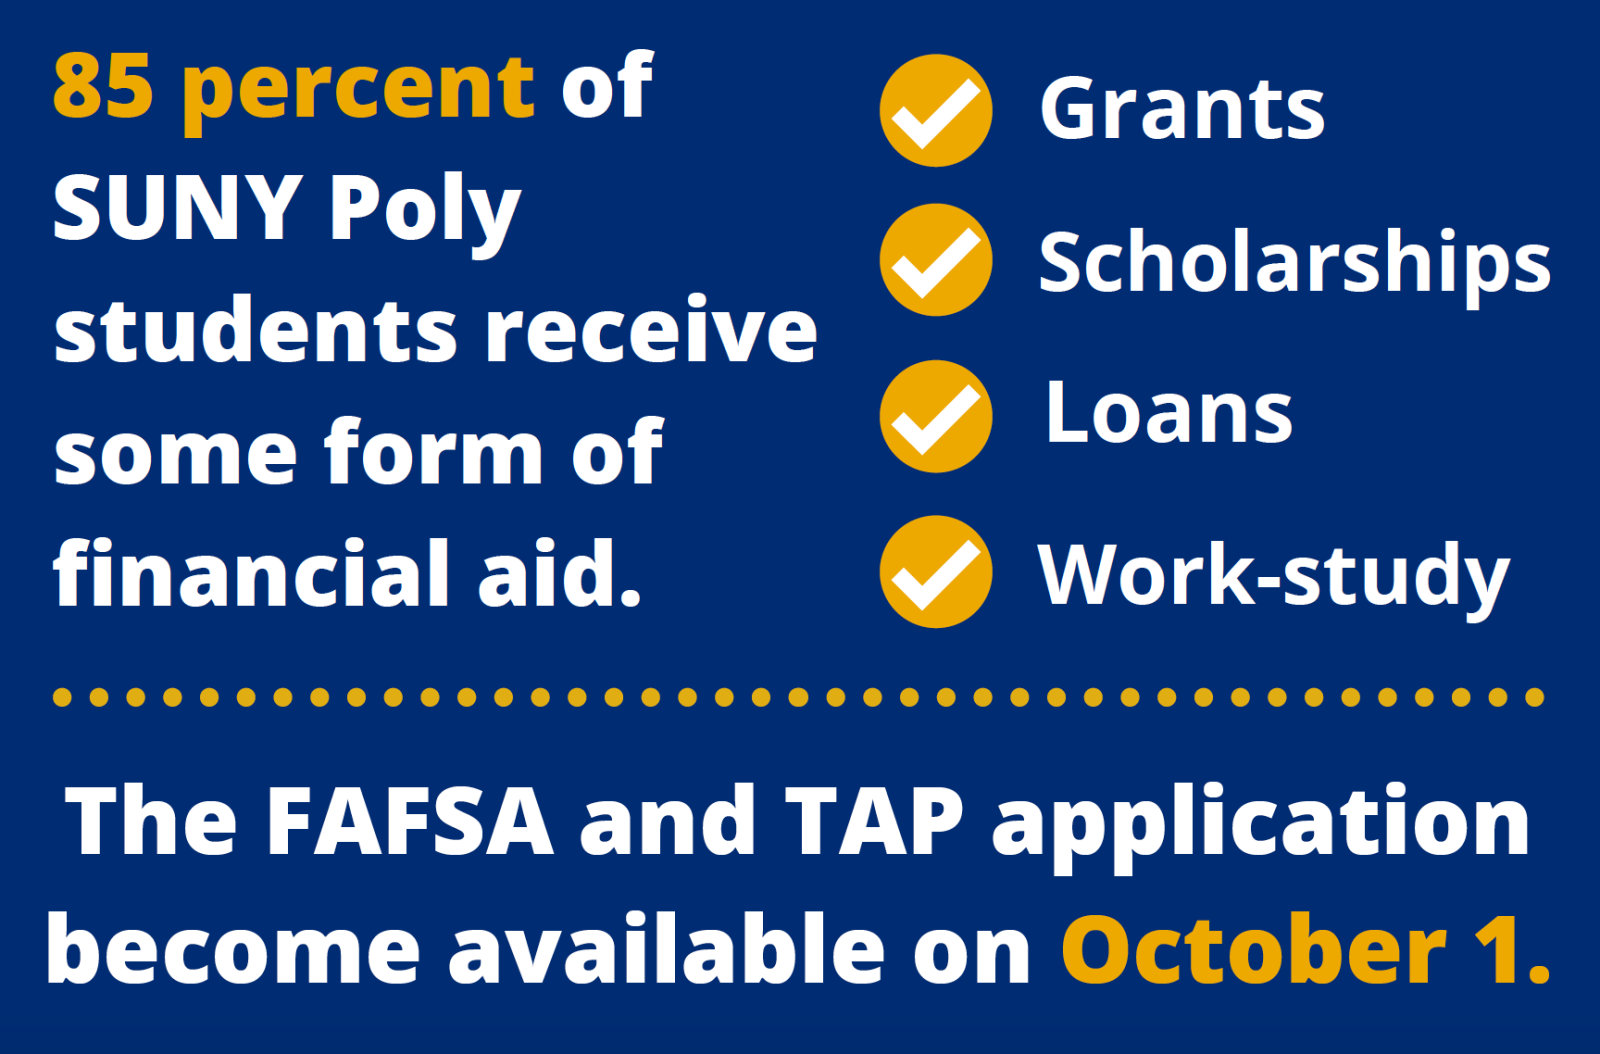 85 percent of SUNY Poly student receive some form of financial aid. This includes grants, scholarships, loans, and work study. The FAFSA and TAP application become available on October 1.